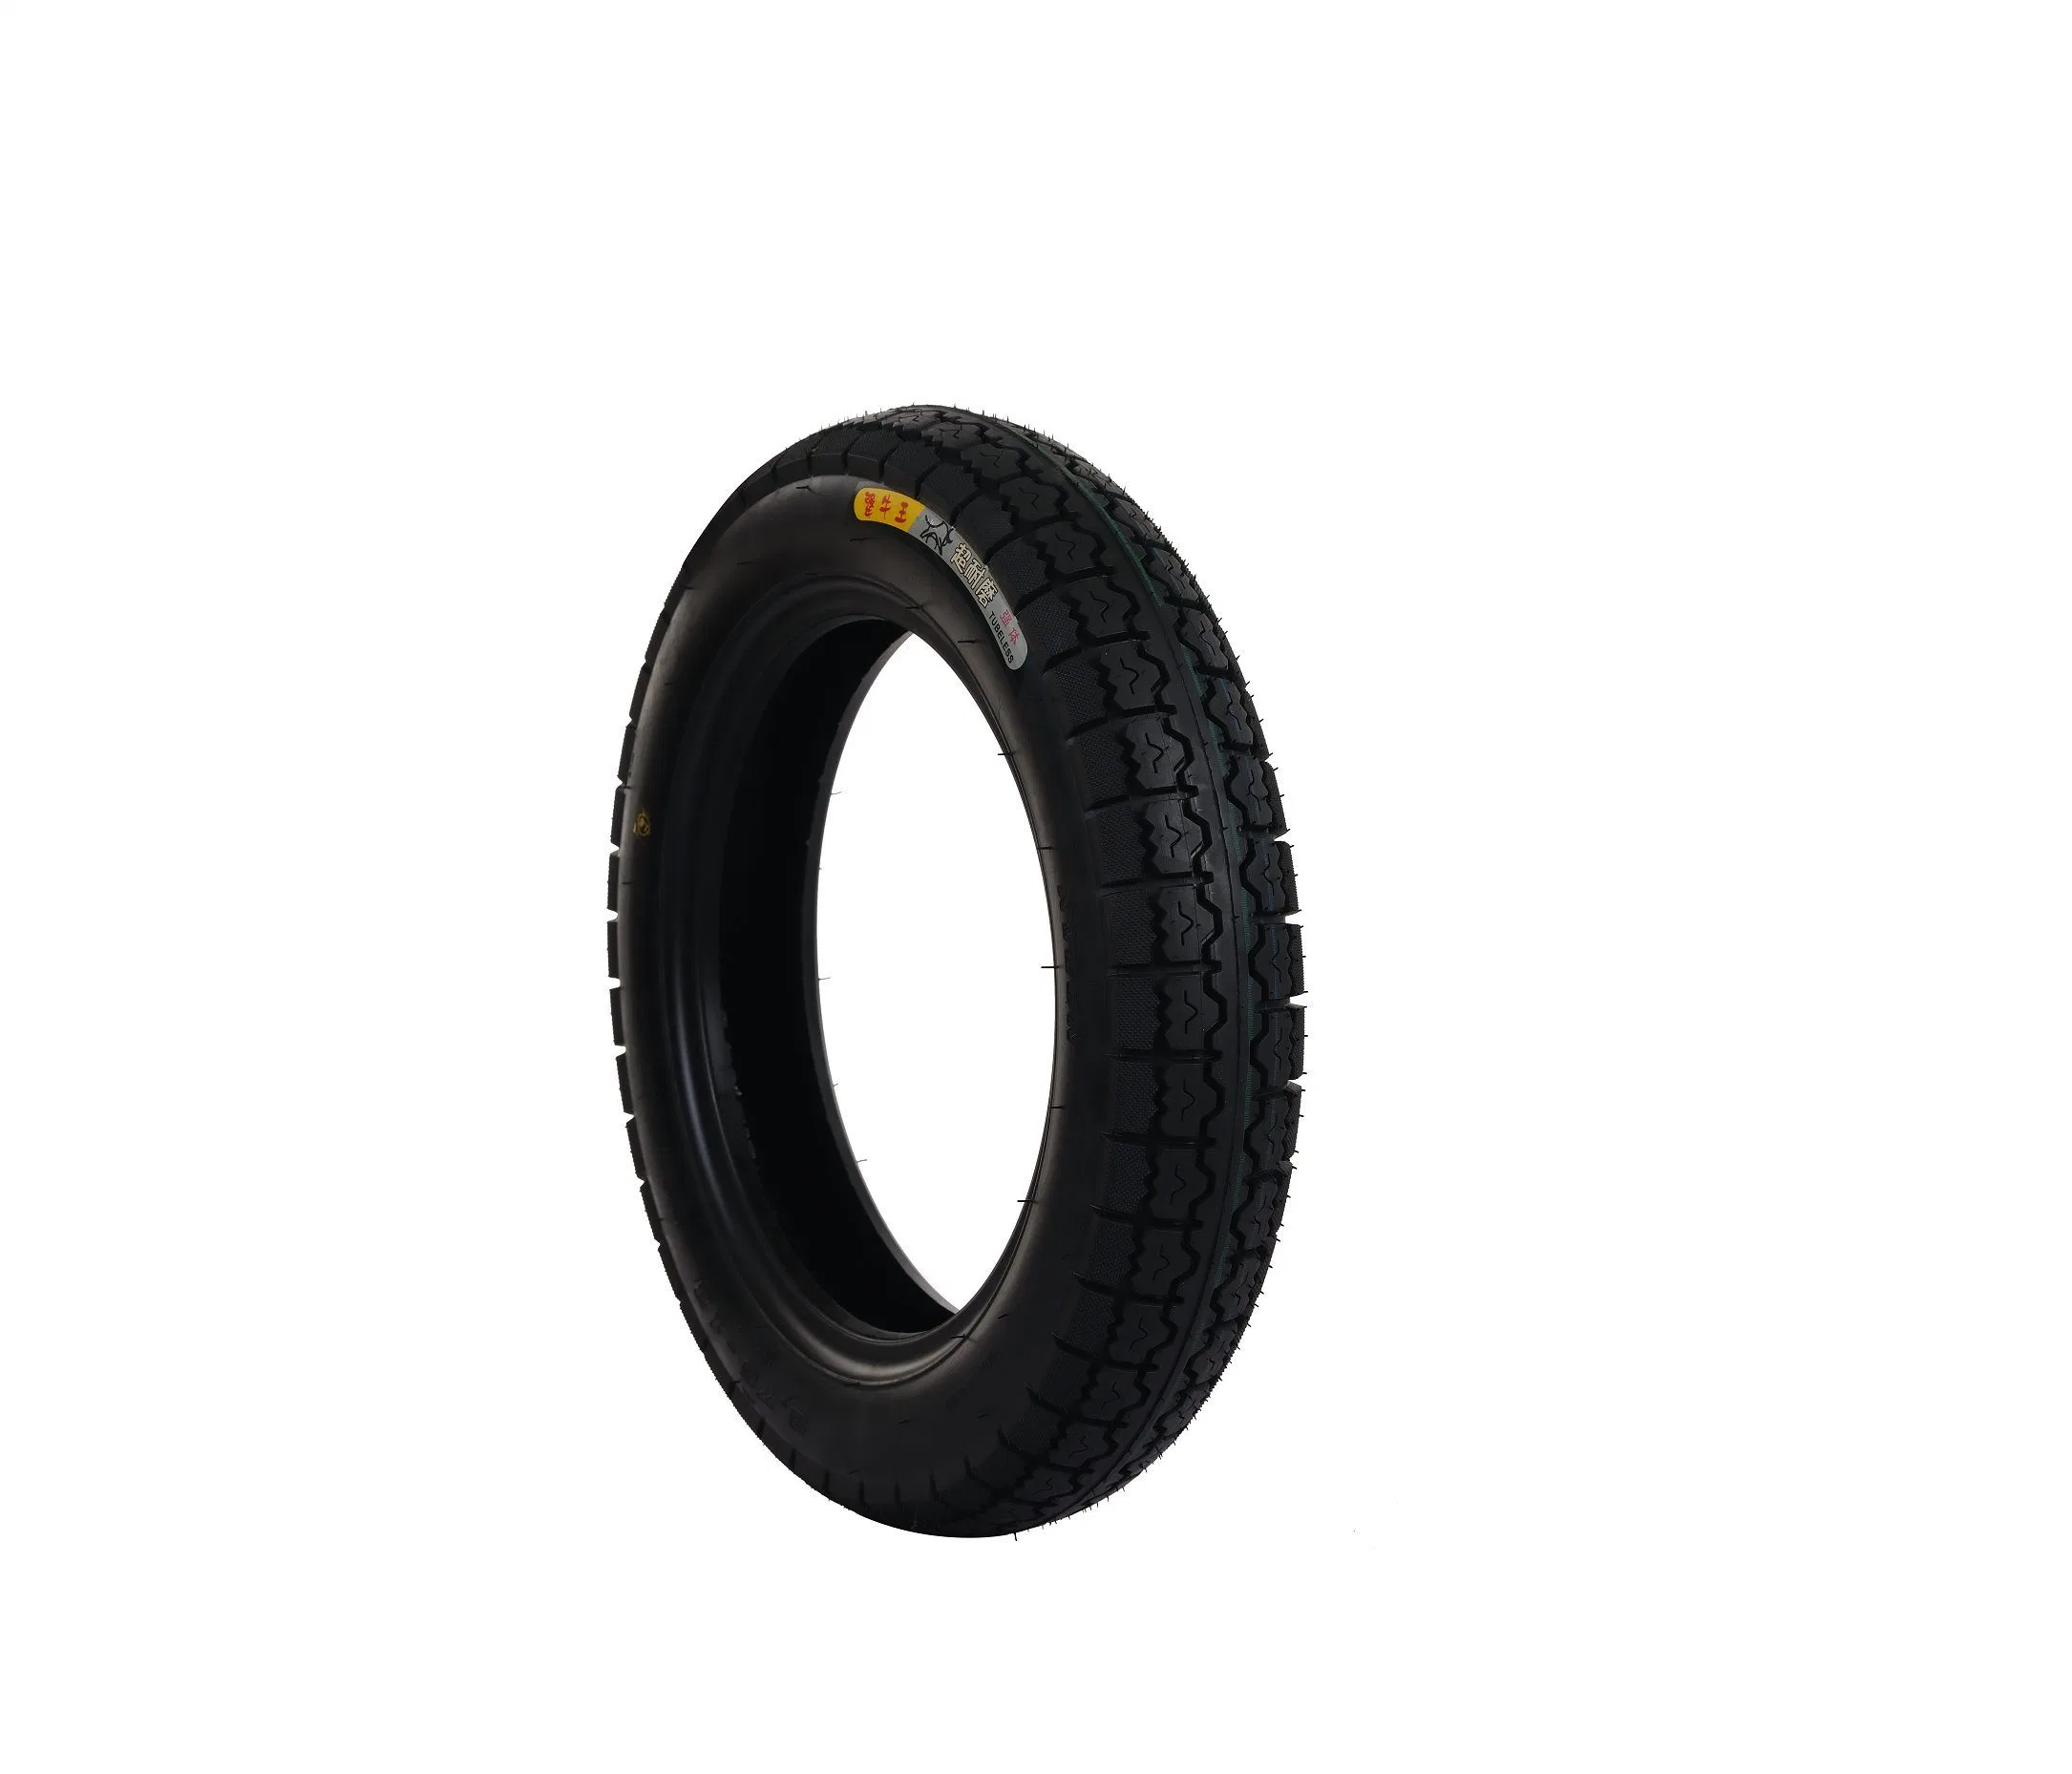 New Design High Quality 3.0-12 Electric Bike Tires